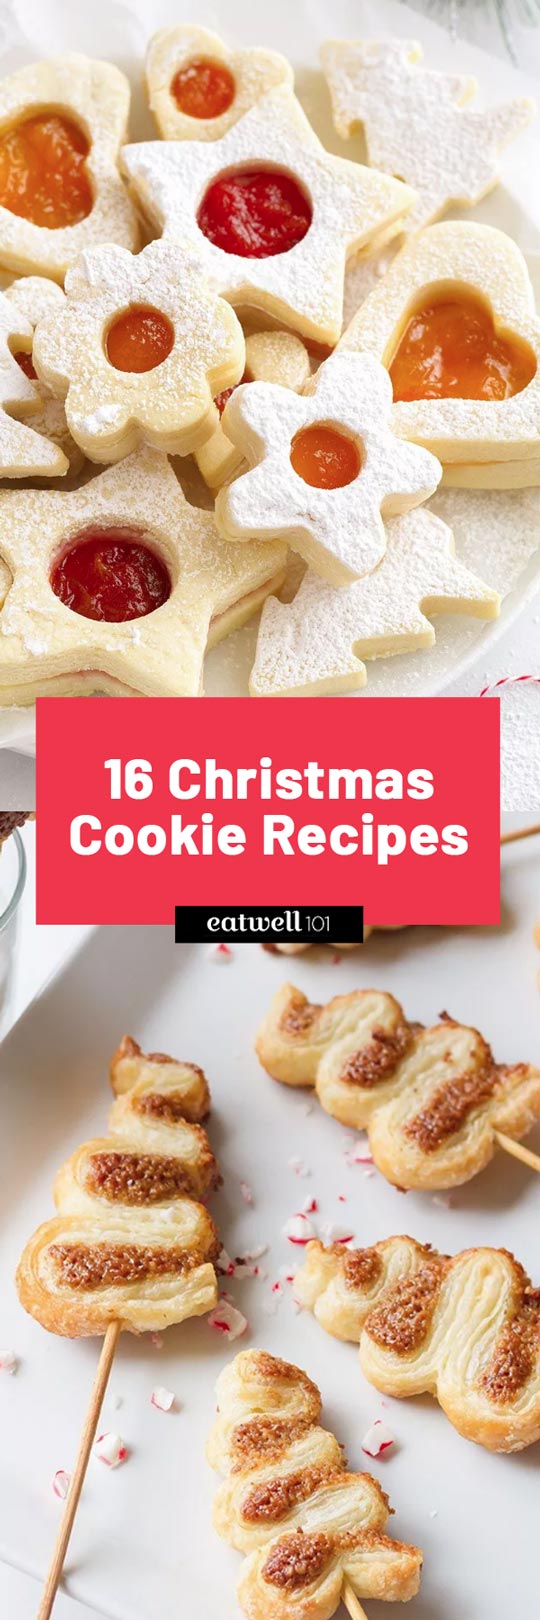 Christmas Cookies Recipes: These delicious Christmas cookies will suit everyone’s taste buds and make an impression at your next cookie swap! CLICK HERE To 